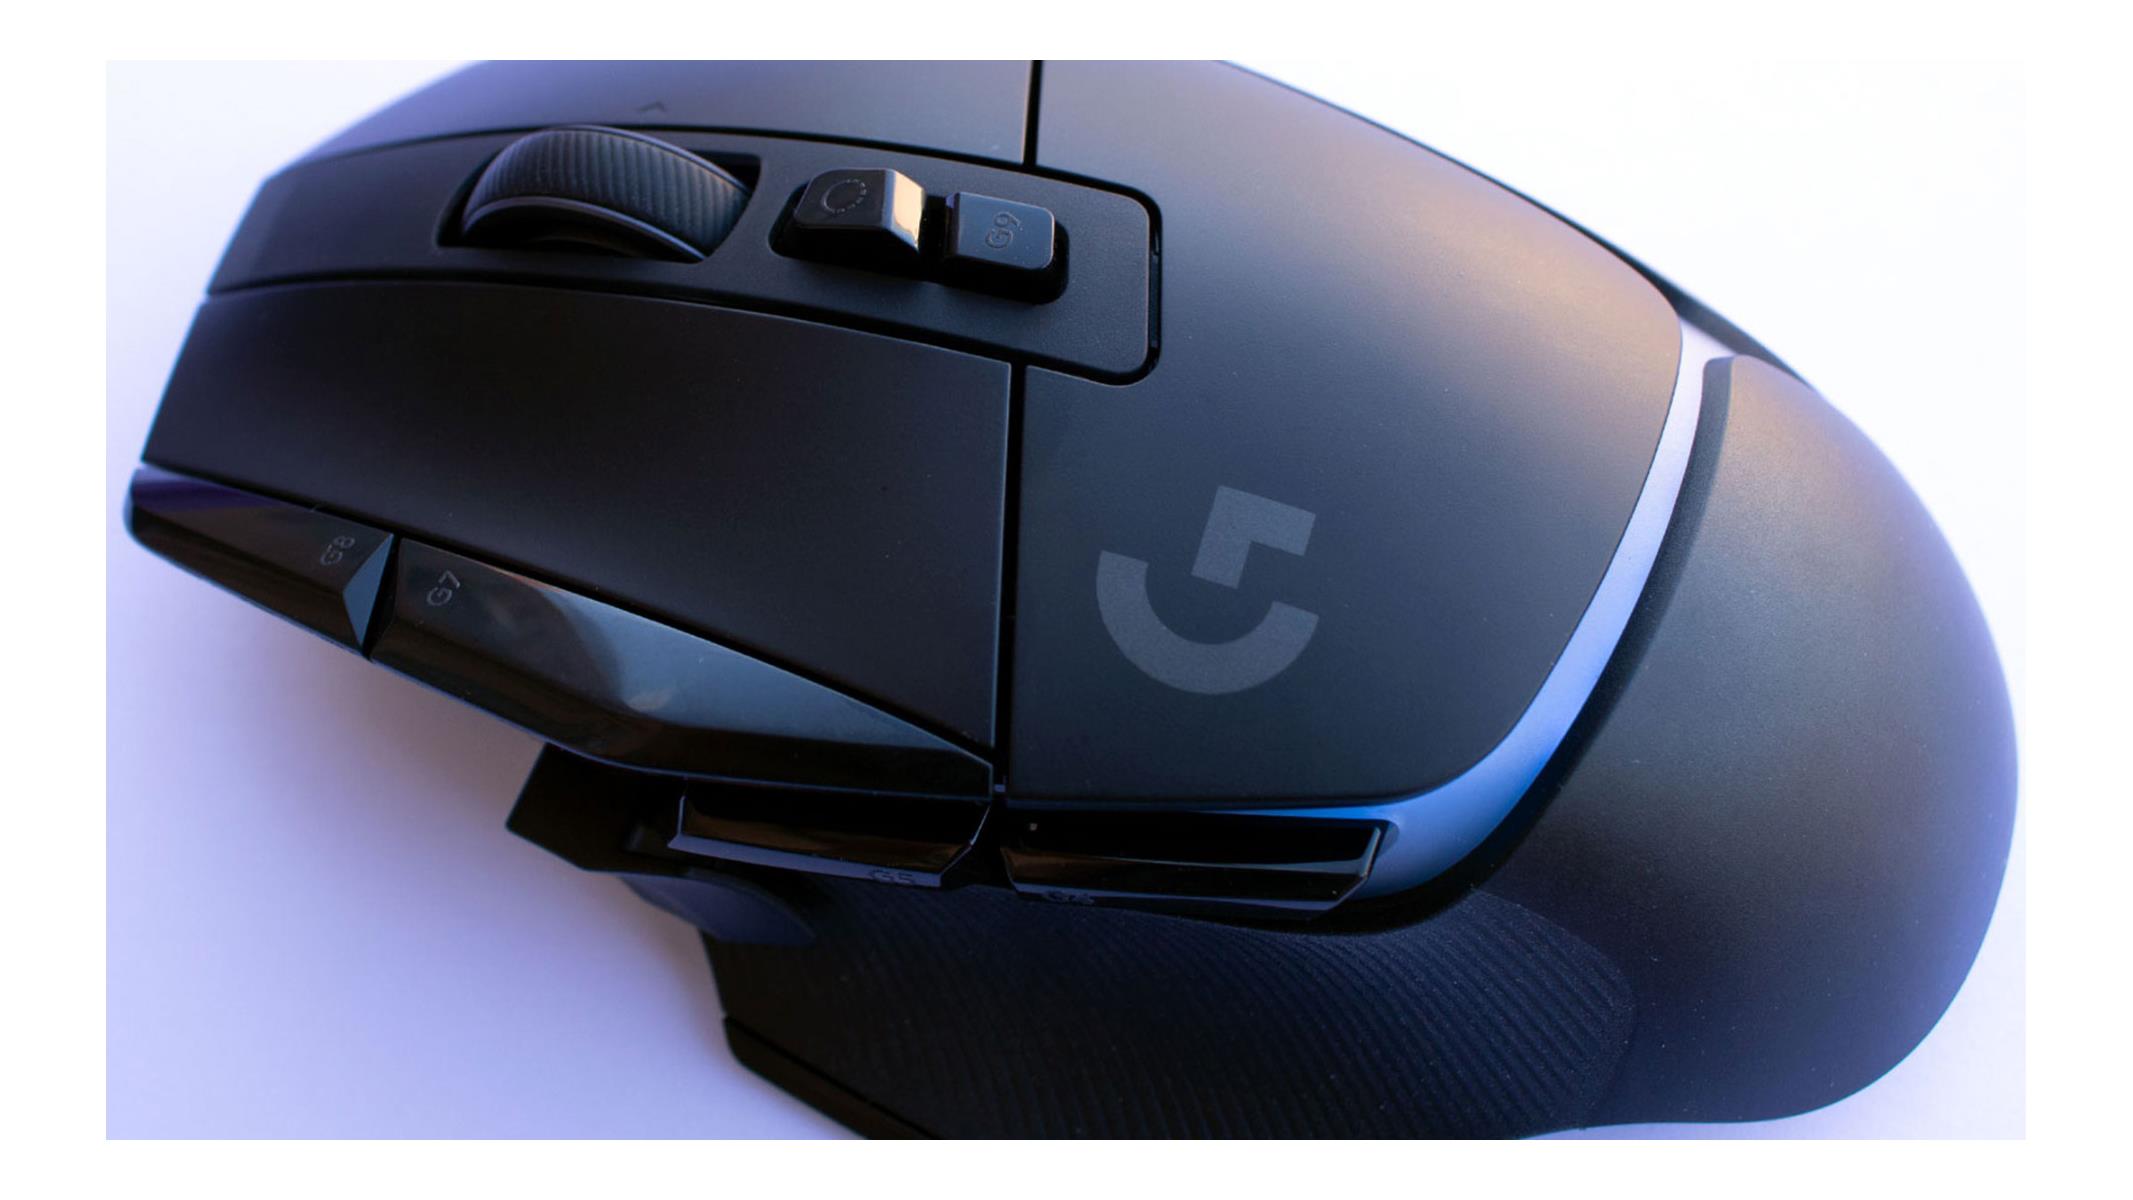 Geek Review: Logitech G502 Lightspeed Wireless Gaming Mouse With